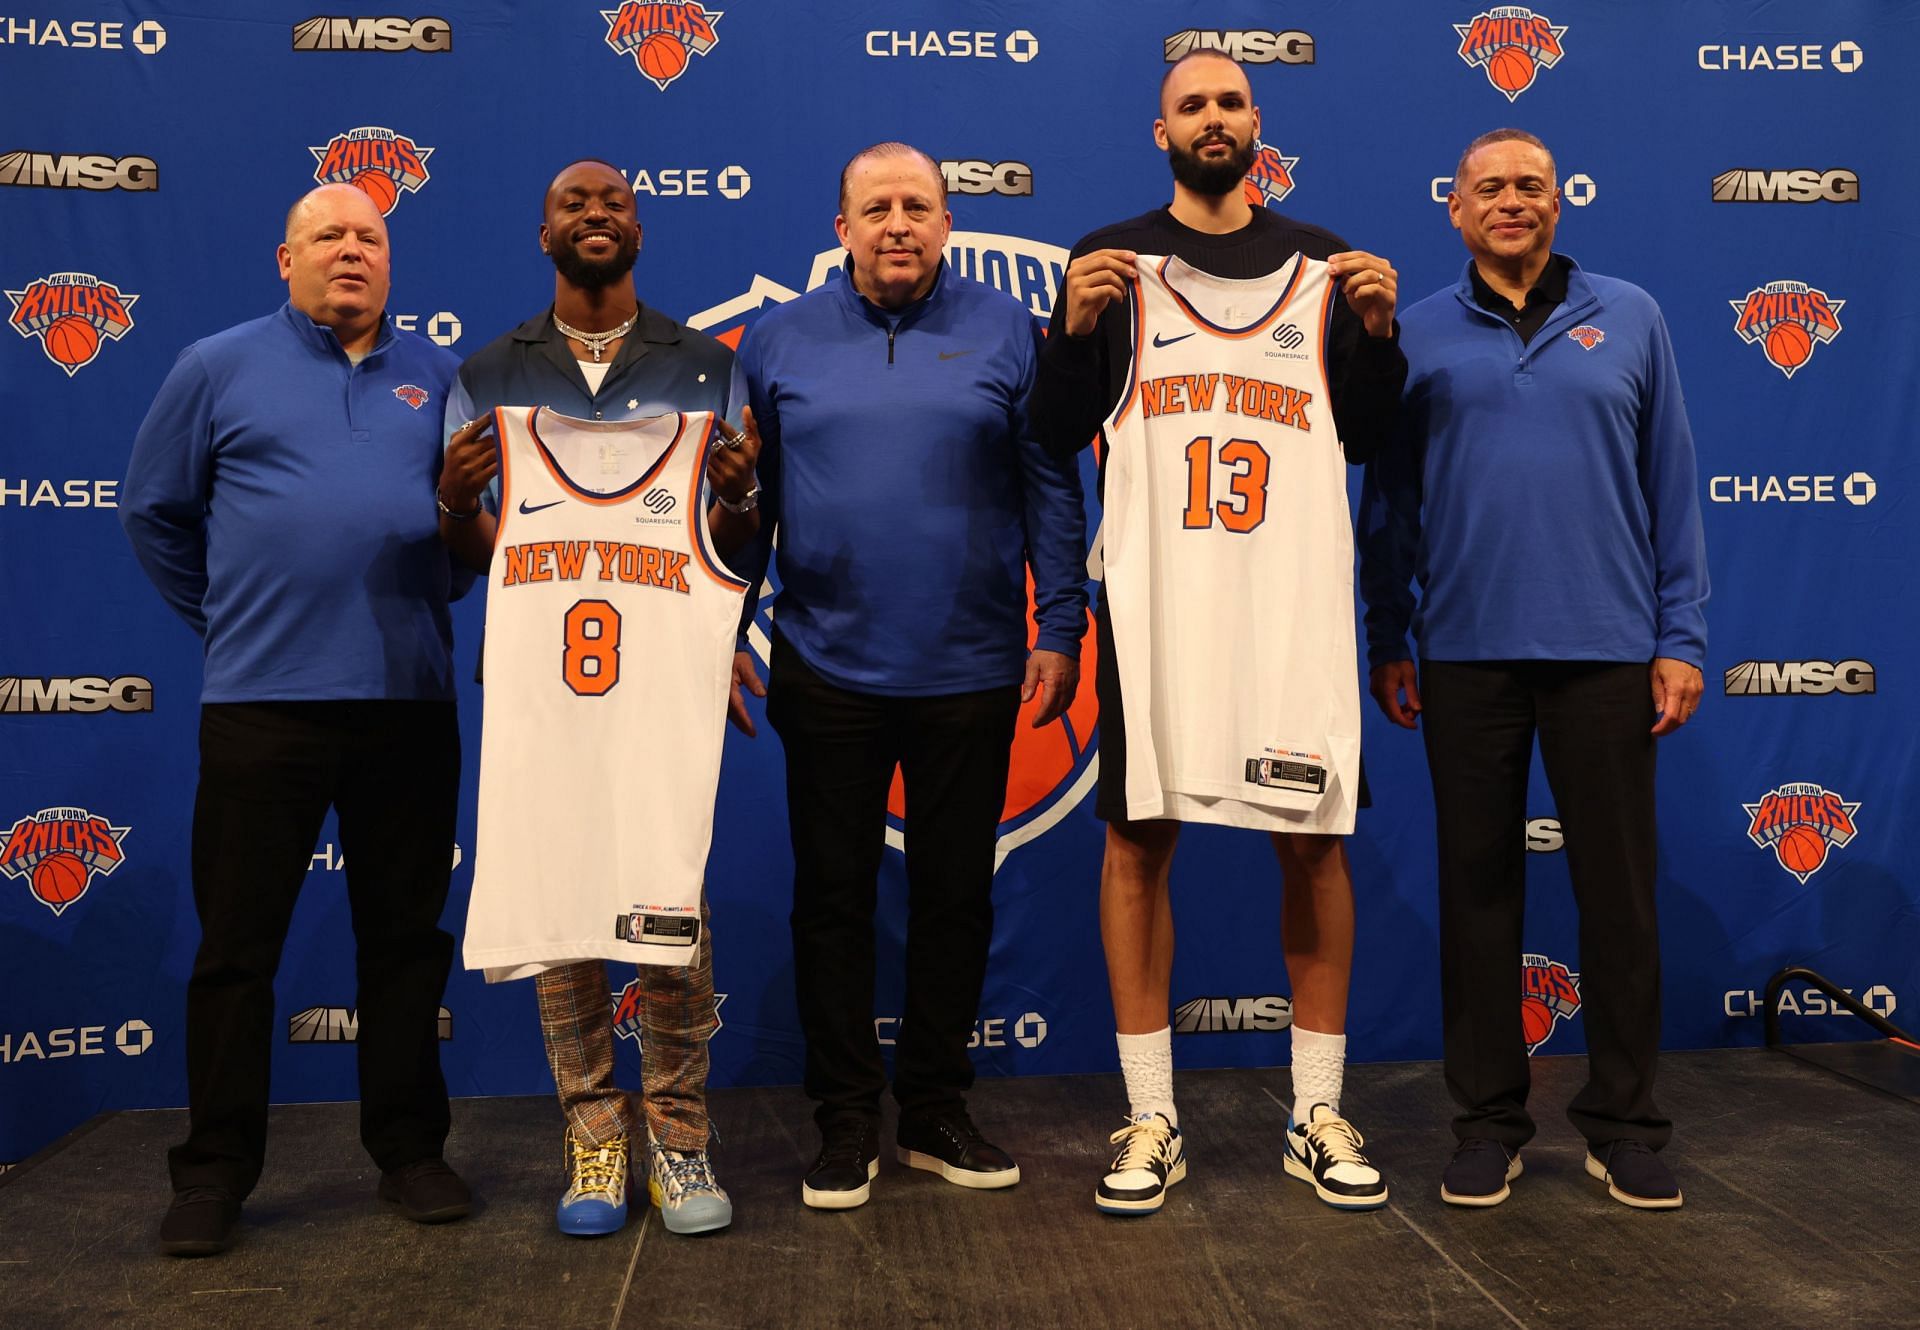 The New York Knicks presenting their new players.